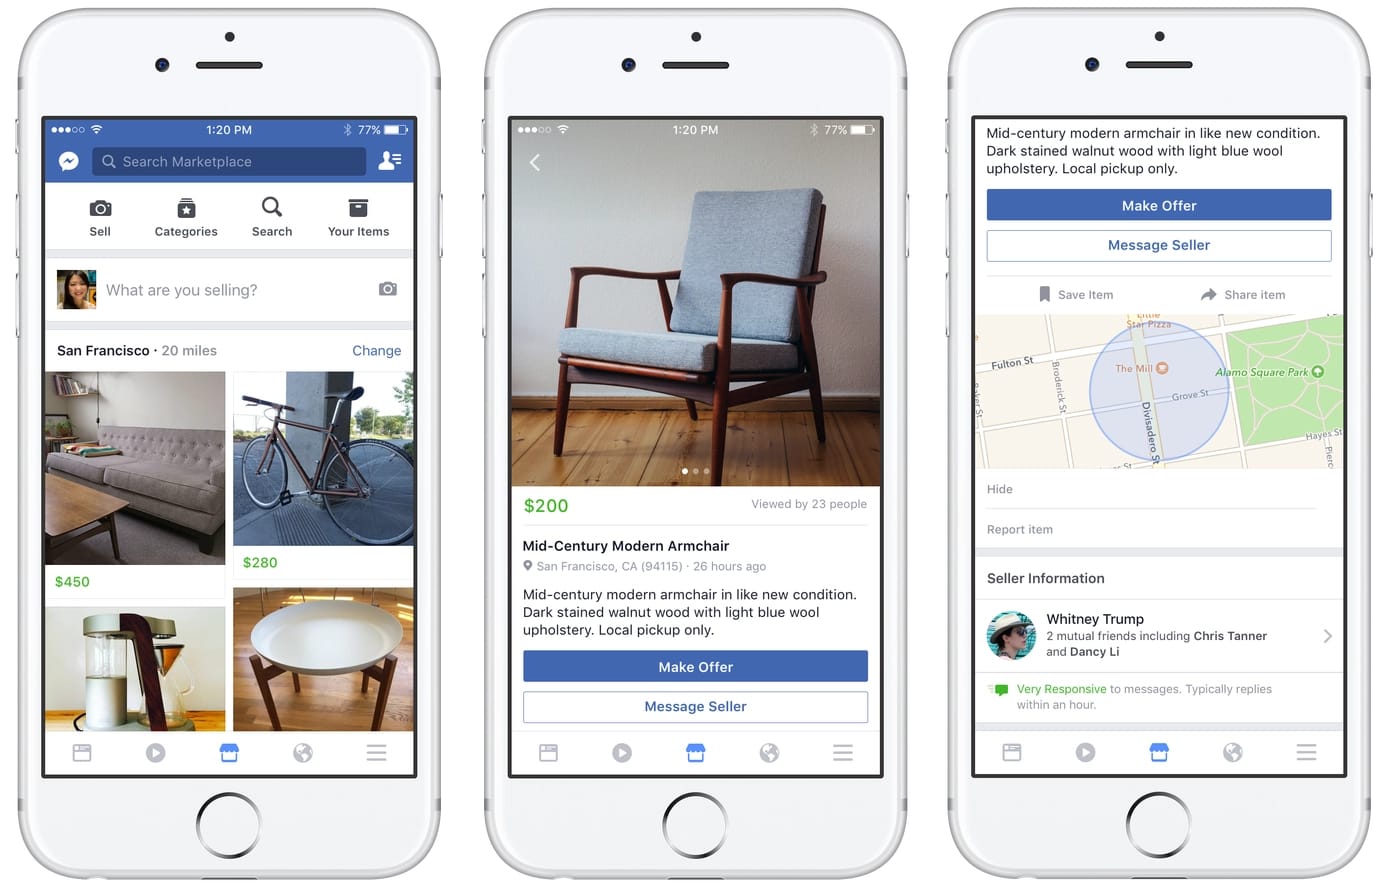 How To Sell on Facebook Marketplace: Benefits + Rules to Follow